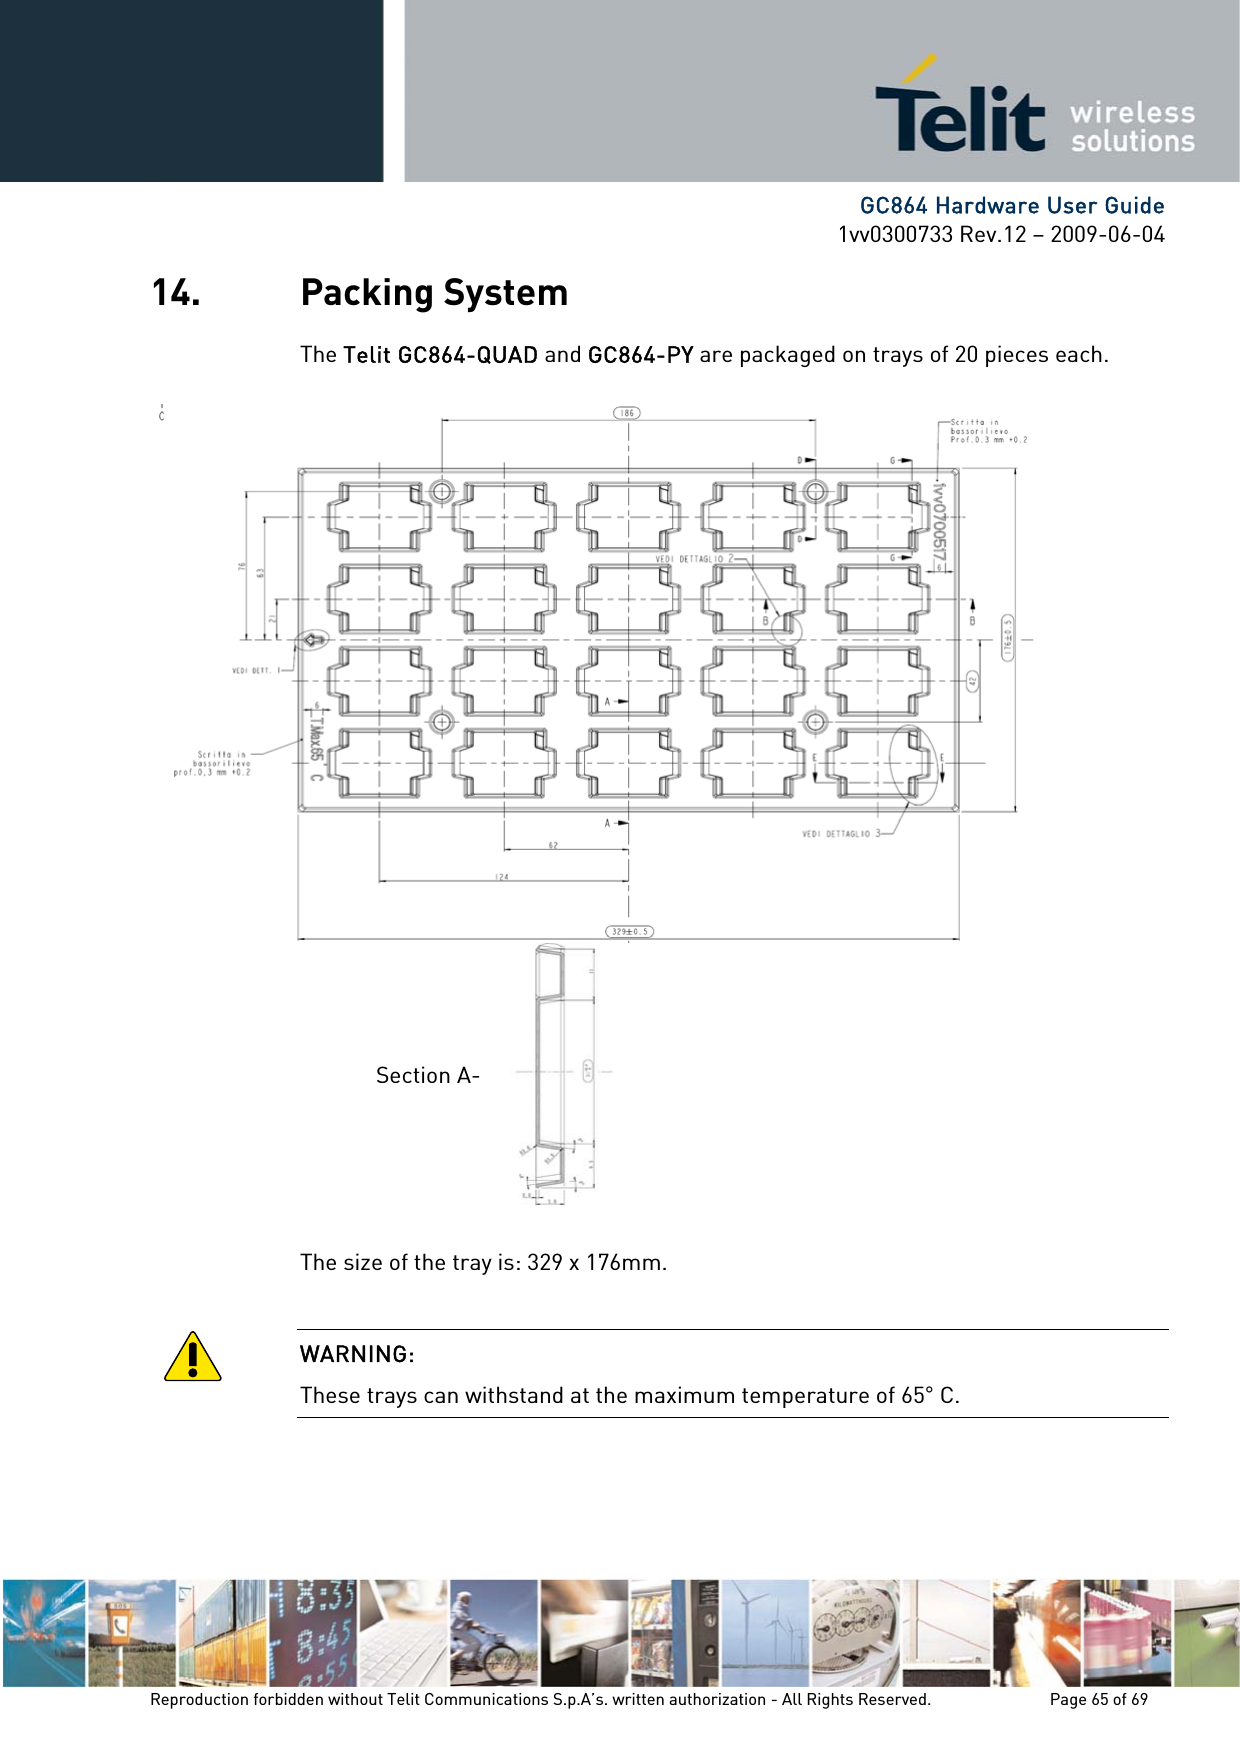      GC864 Hardware User Guide 1vv0300733 Rev.12 – 2009-06-04 14. Packing System The Telit GC864-QUAD and GC864-PY are packaged on trays of 20 pieces each.  The size of the tray is: 329 x 176mm.  WARNING: These trays can withstand at the maximum temperature of 65° C. Section A-Reproduction forbidden without Telit Communications S.p.A’s. written authorization - All Rights Reserved.    Page 65 of 69  